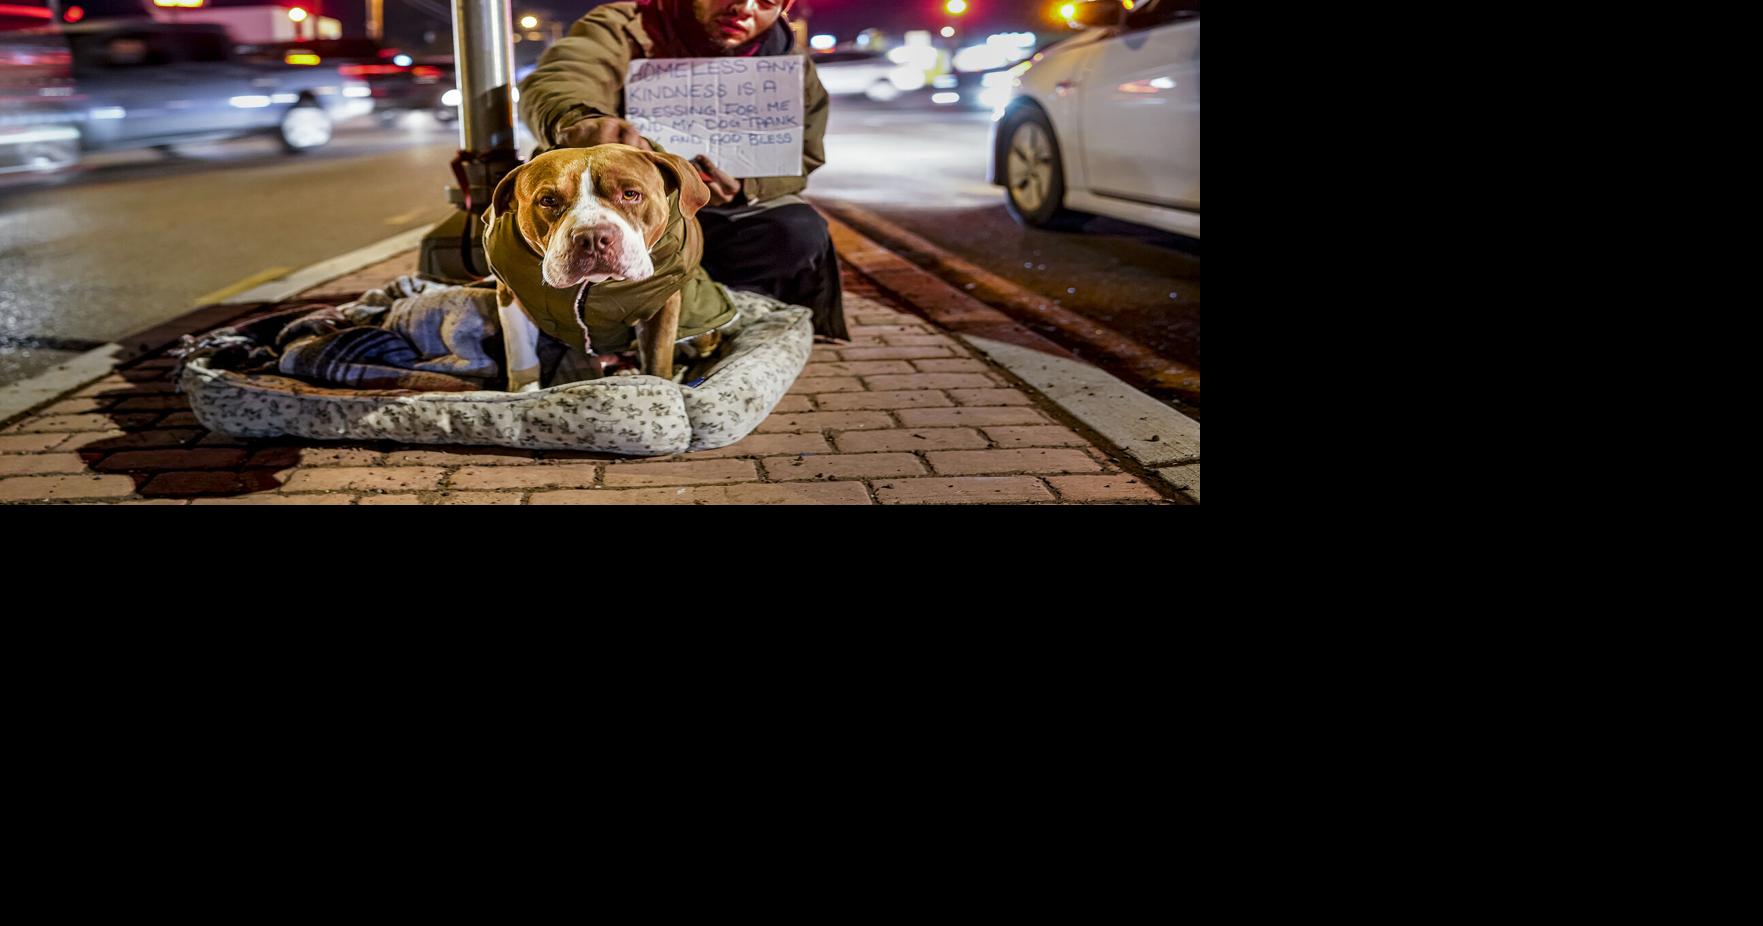 homeless people with pets